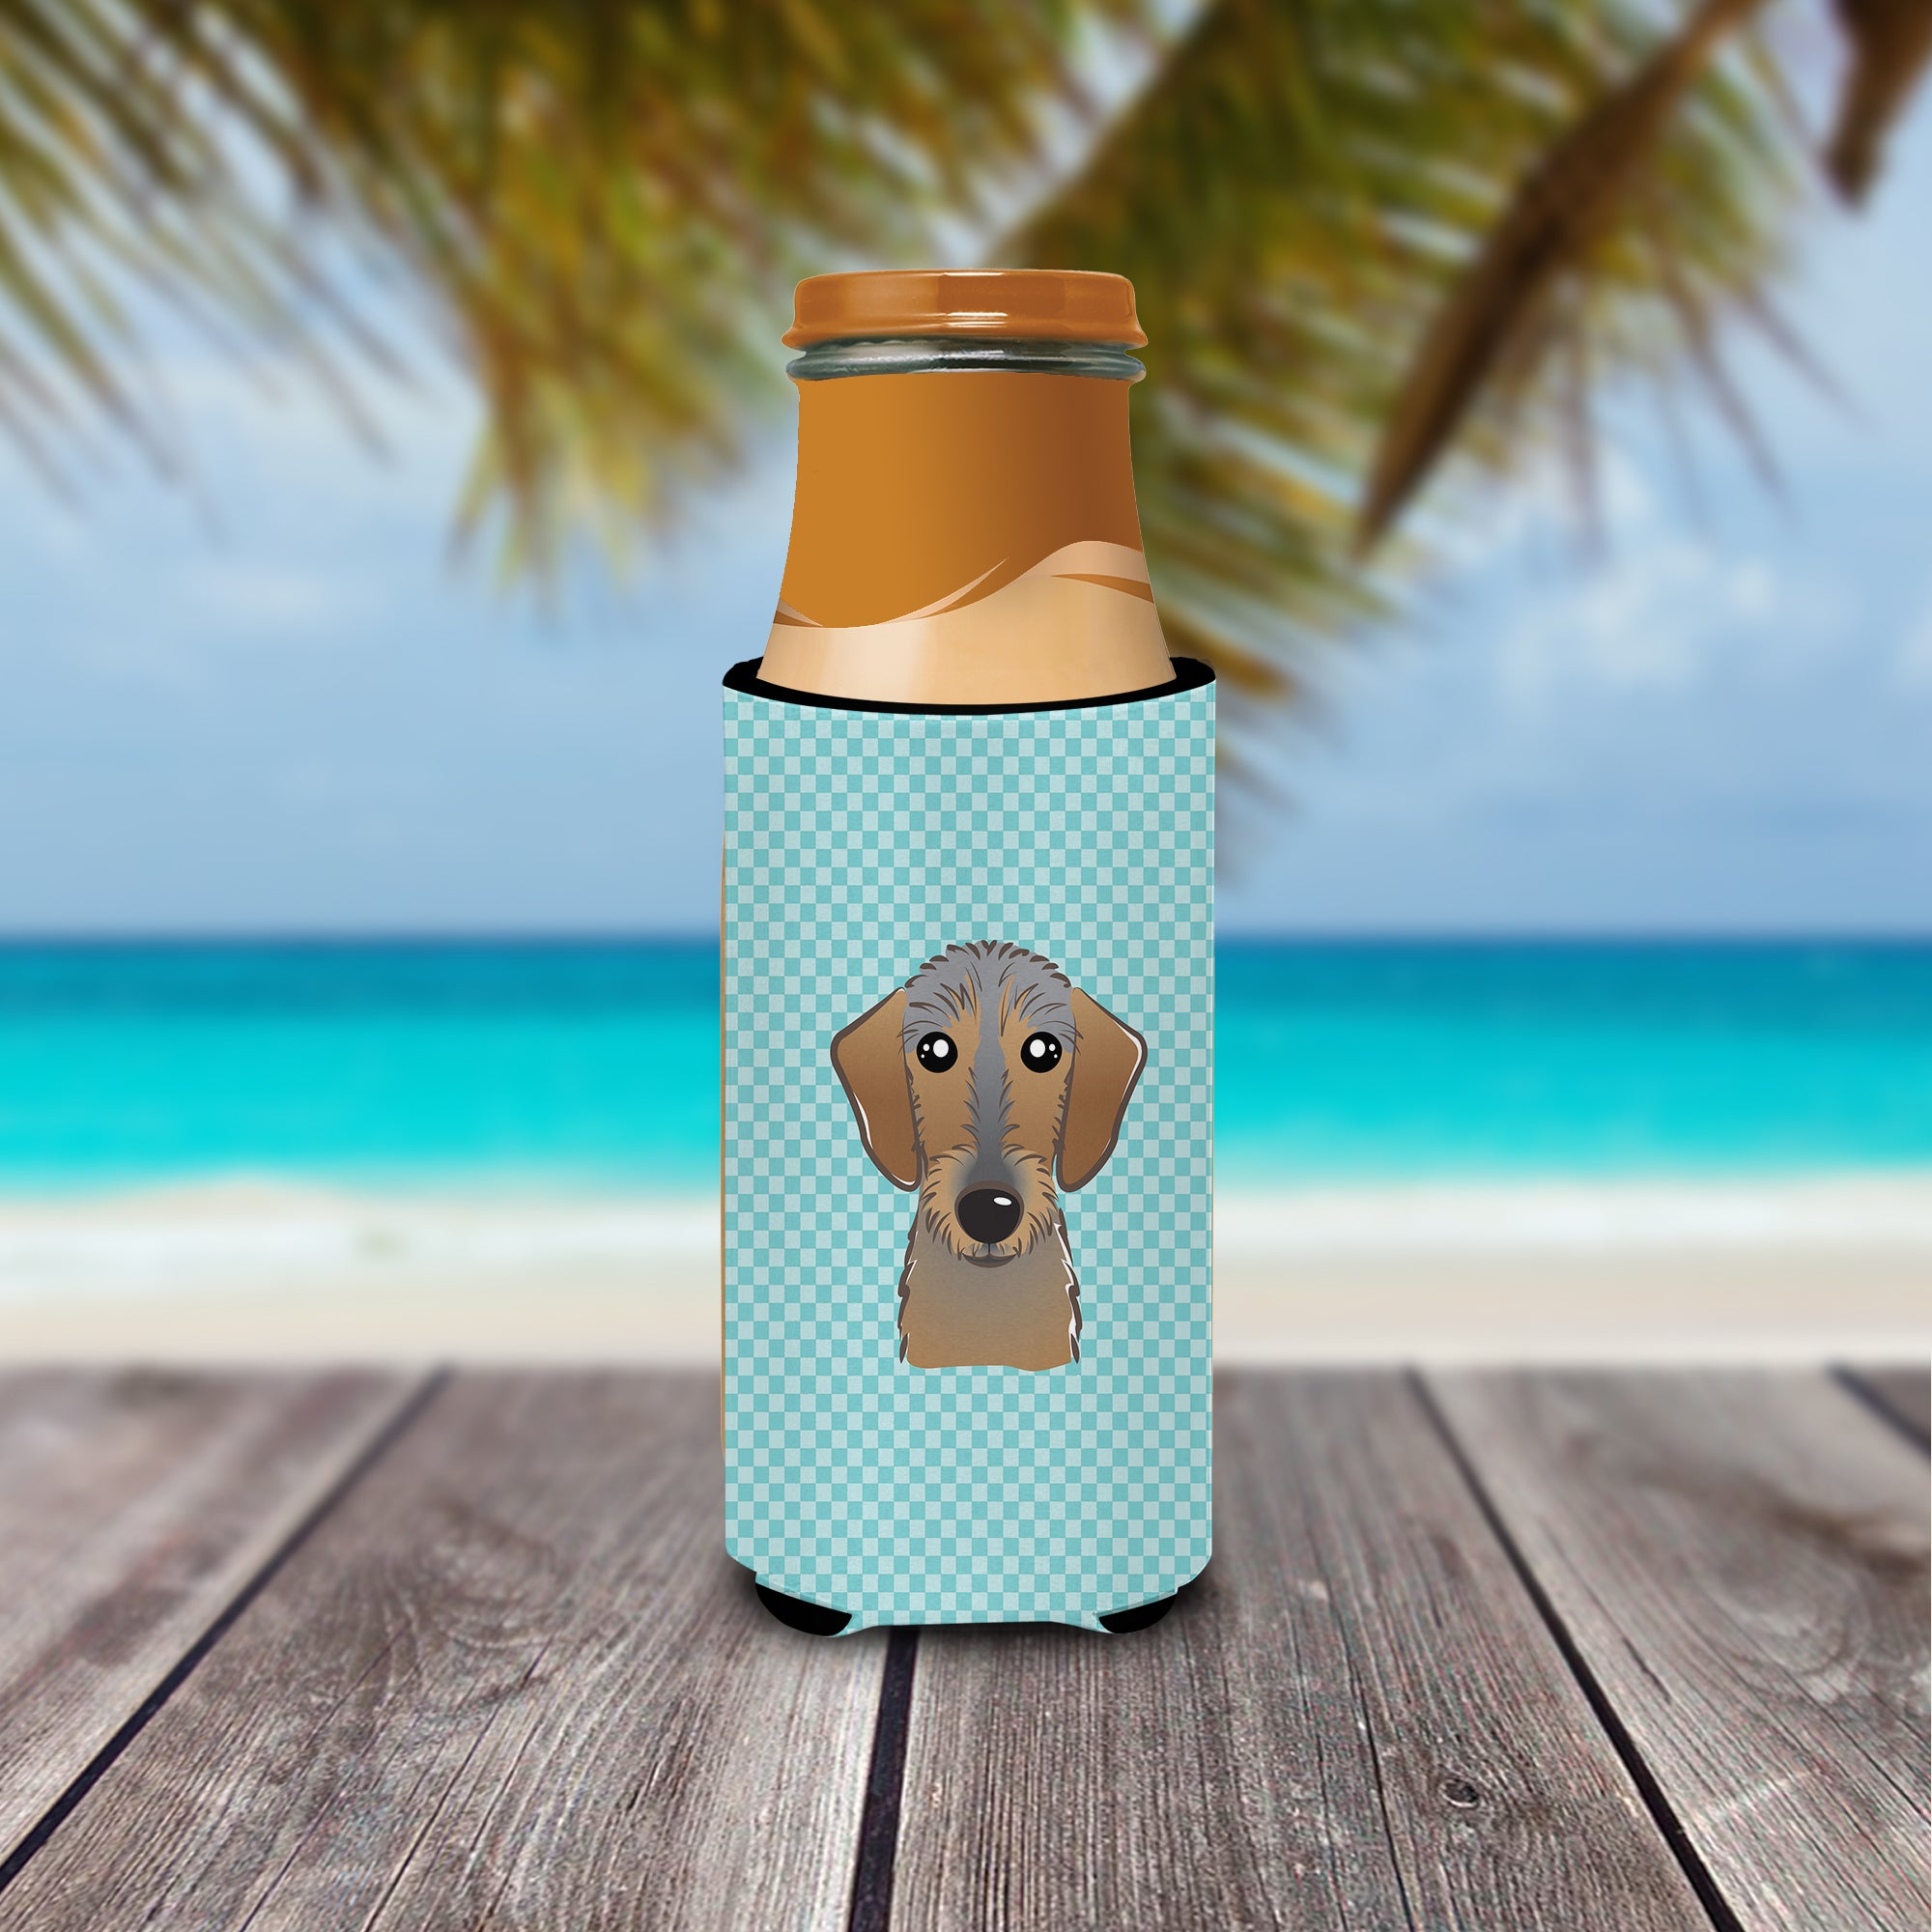 Checkerboard Blue Wirehaired Dachshund Ultra Beverage Insulators for slim cans.